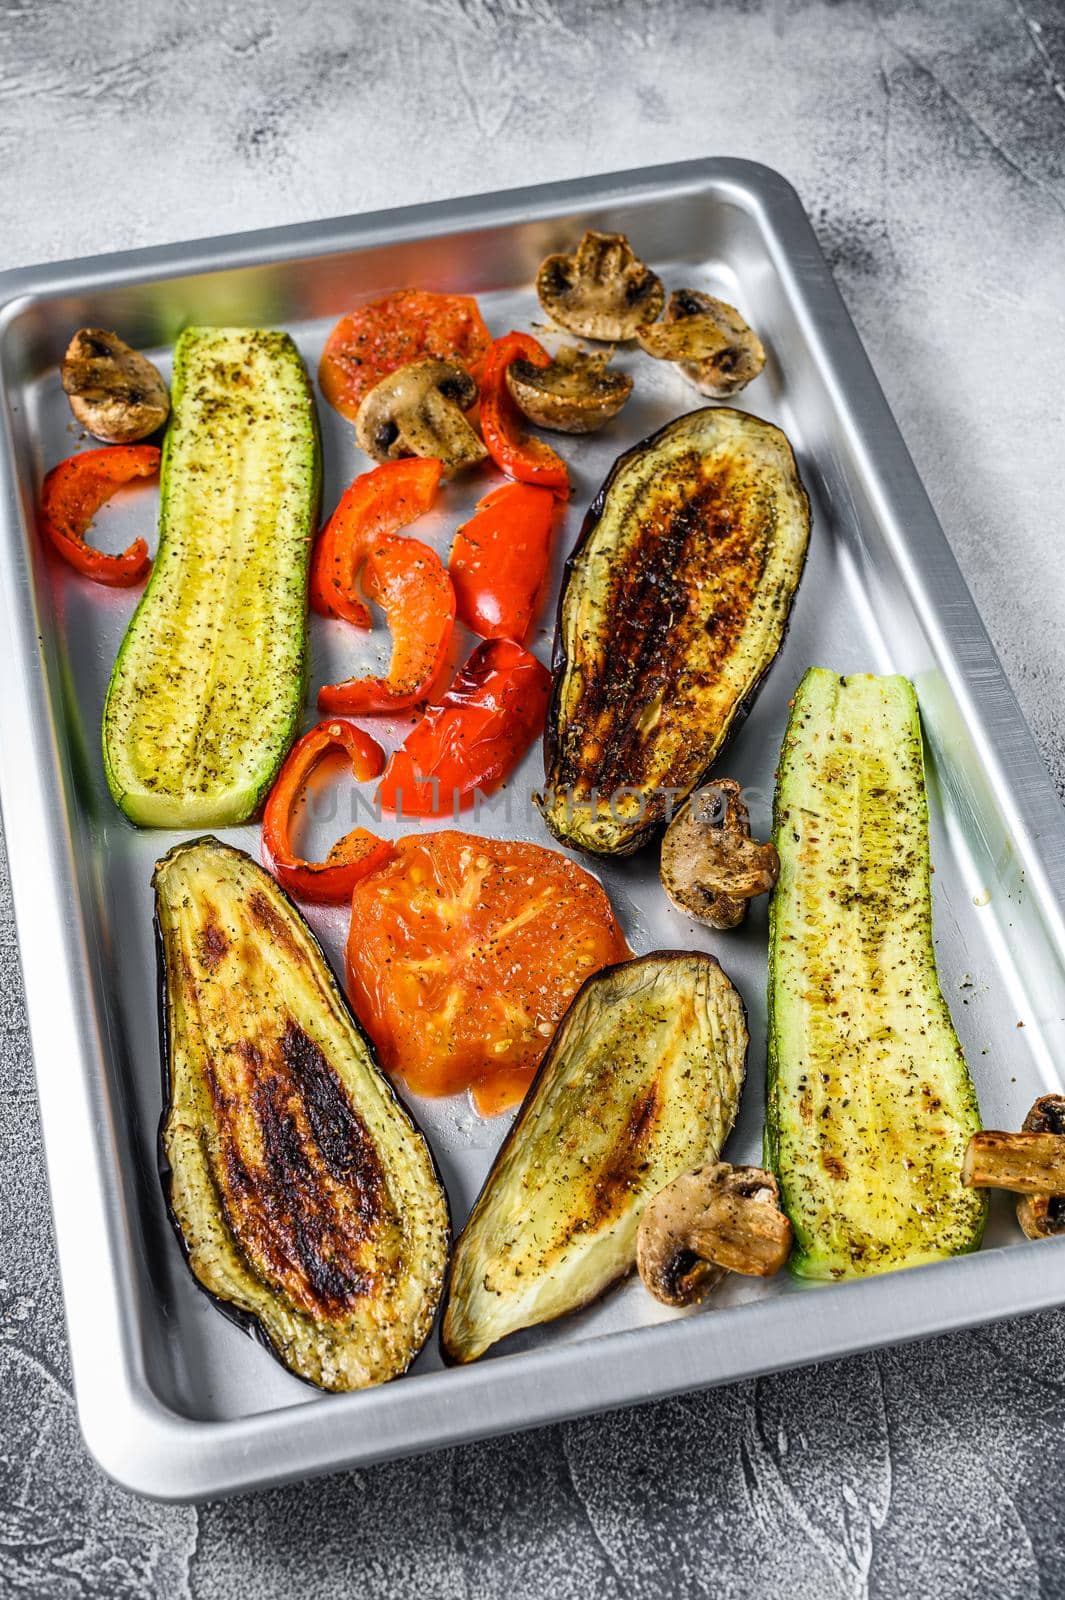 Roasted vegetables on a baking pan. White background. Top view.